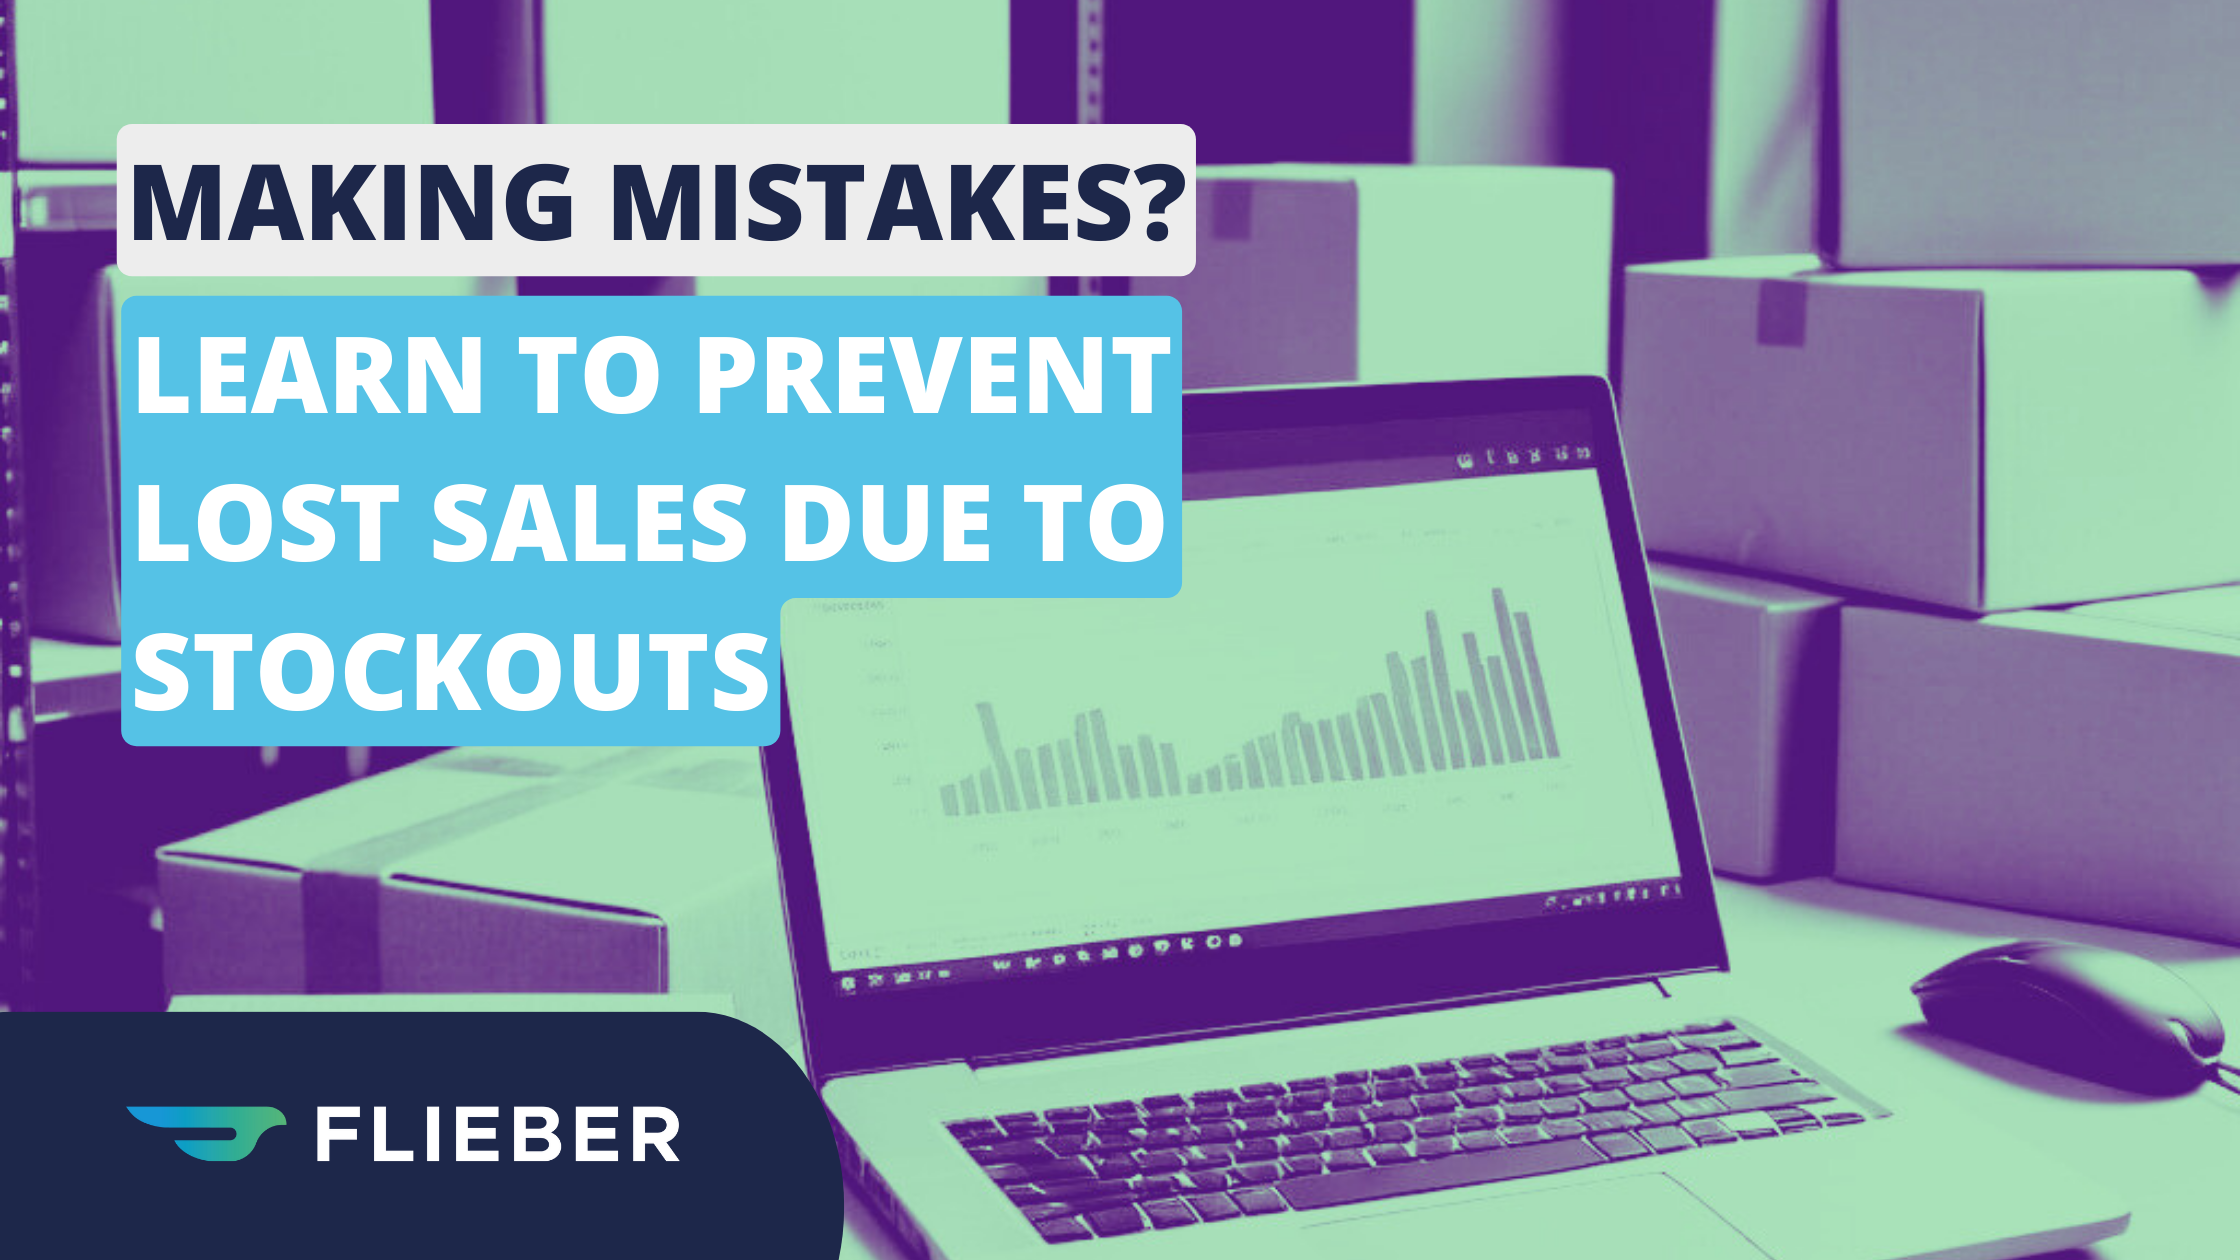 Making These Mistakes? Learn to Prevent Lost Sales Due to Stockouts